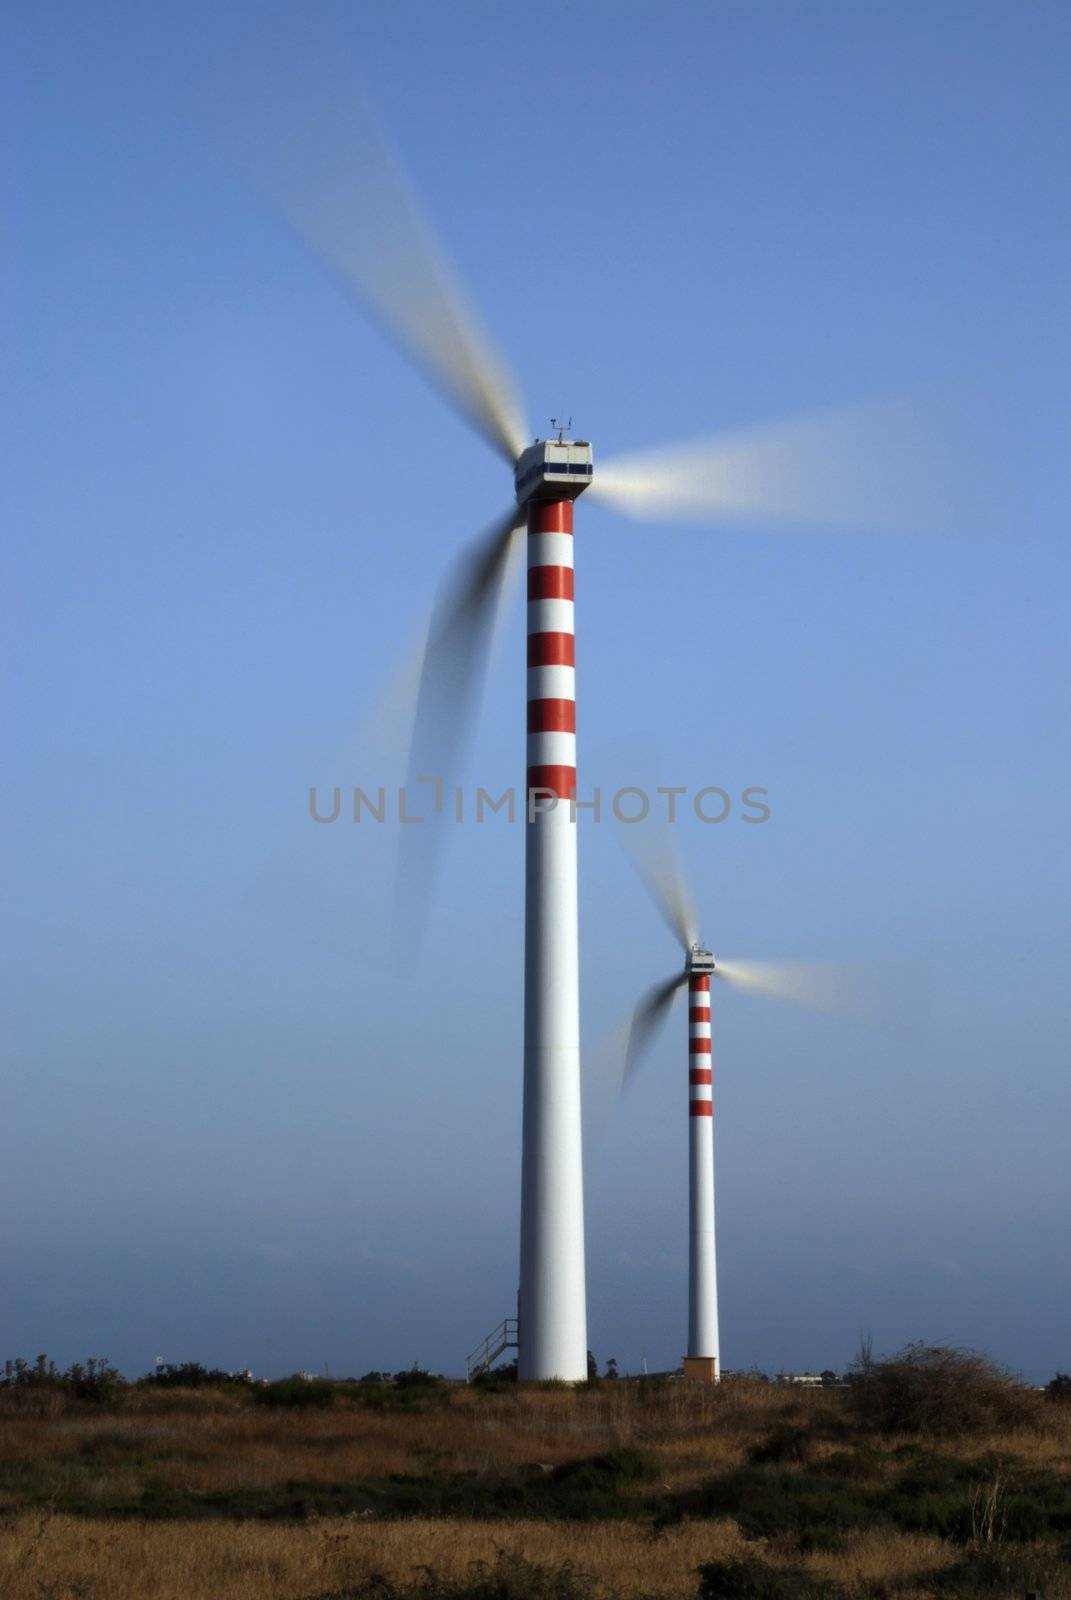 Wind turbines in motion by fyletto